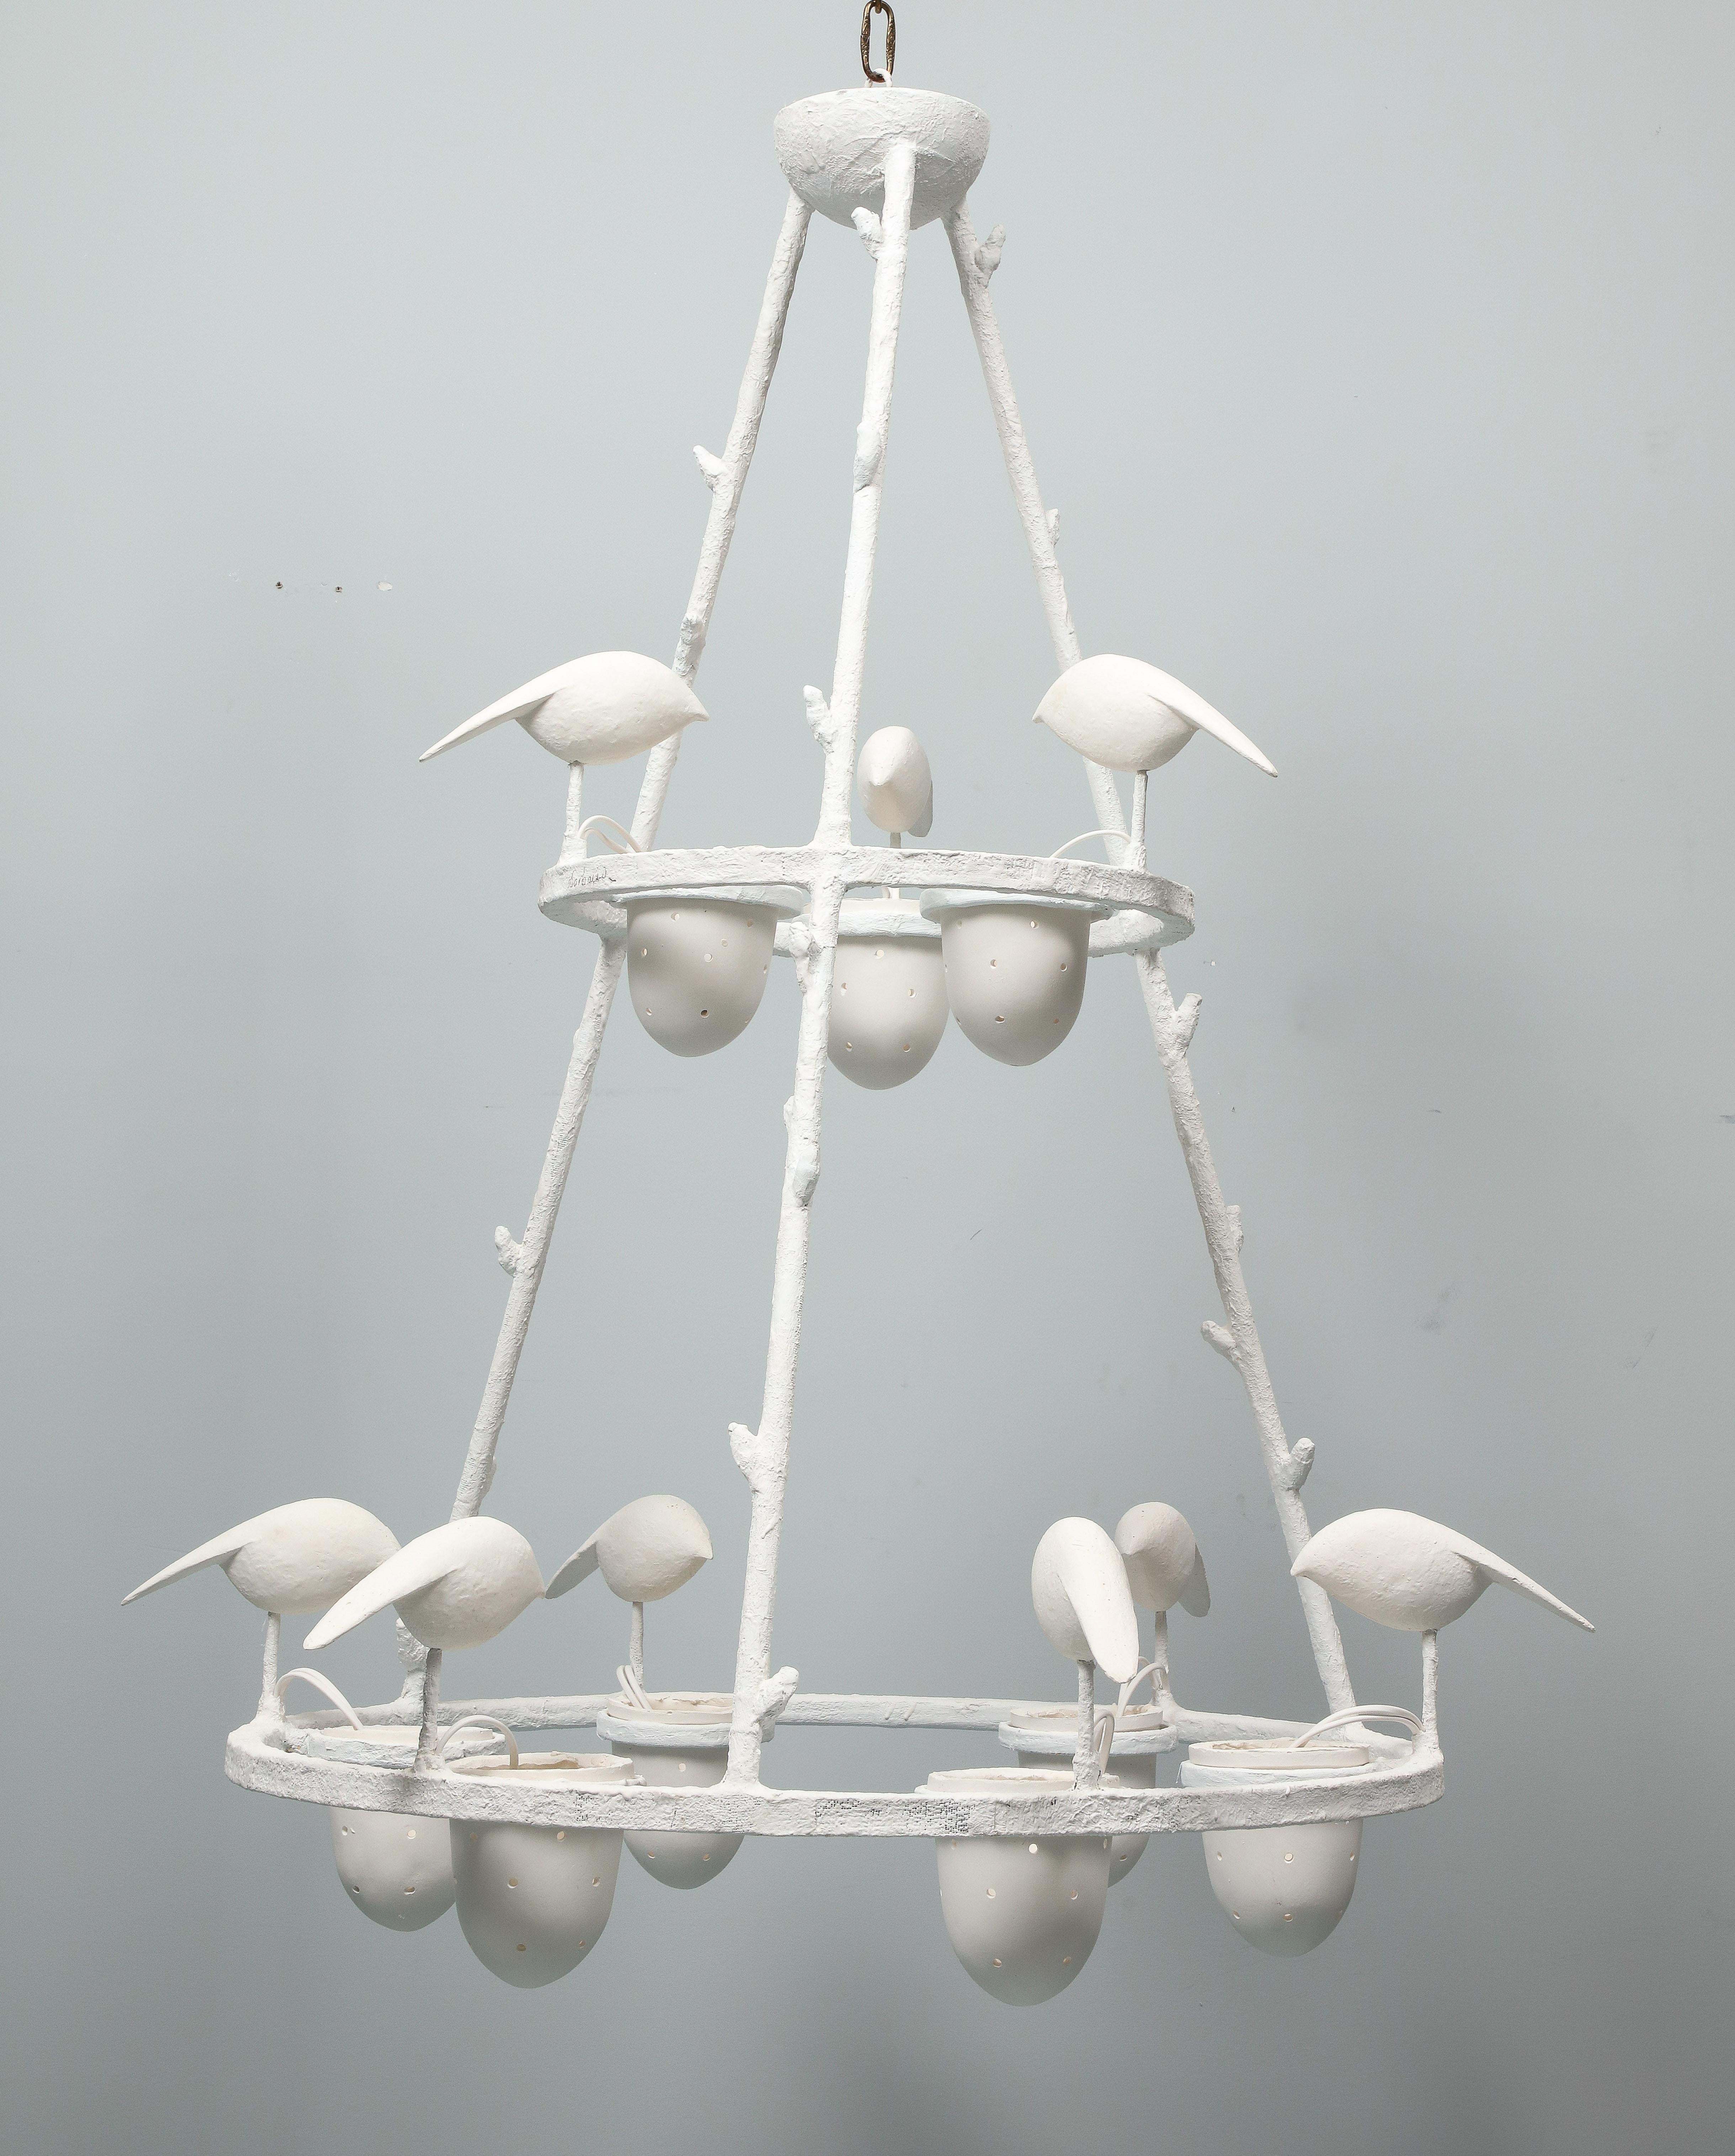 This chandelier is impressive by its scale. It has been created and made by Jacques Darbaud. The structure which is in metal, is covered by white plaster. It has 9 lights, American wired. The design shows birds perching on the frame and pecking in